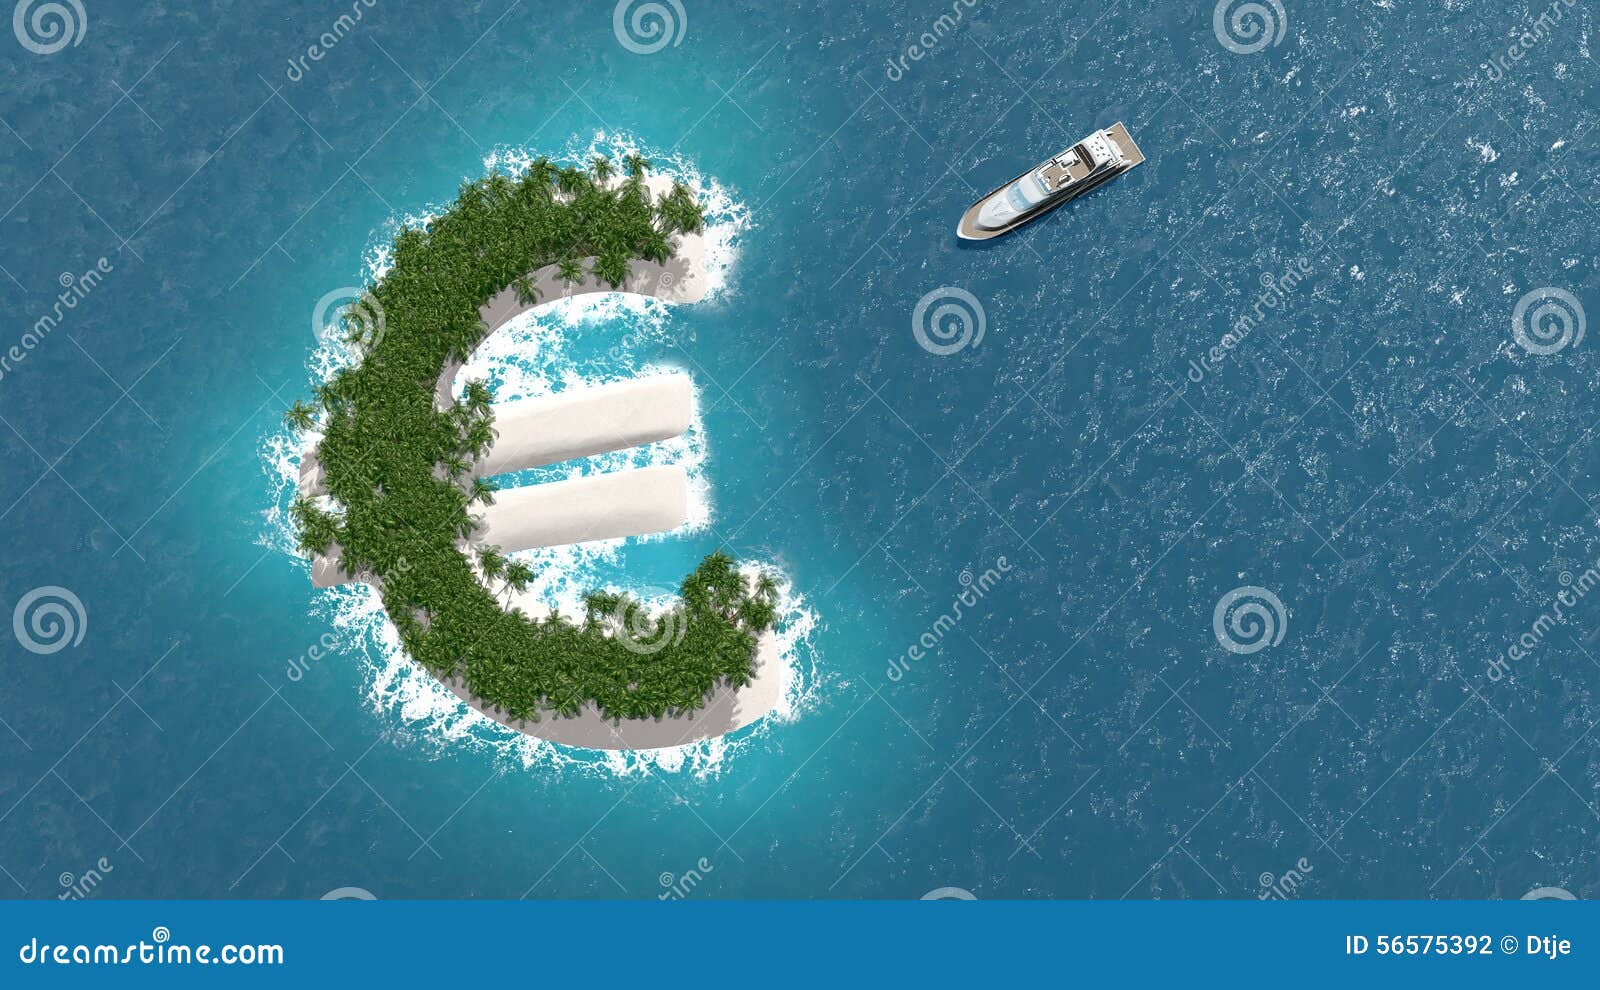 tax haven, financial or wealth evasion on a euro island. a luxury boat is sailing to the island.